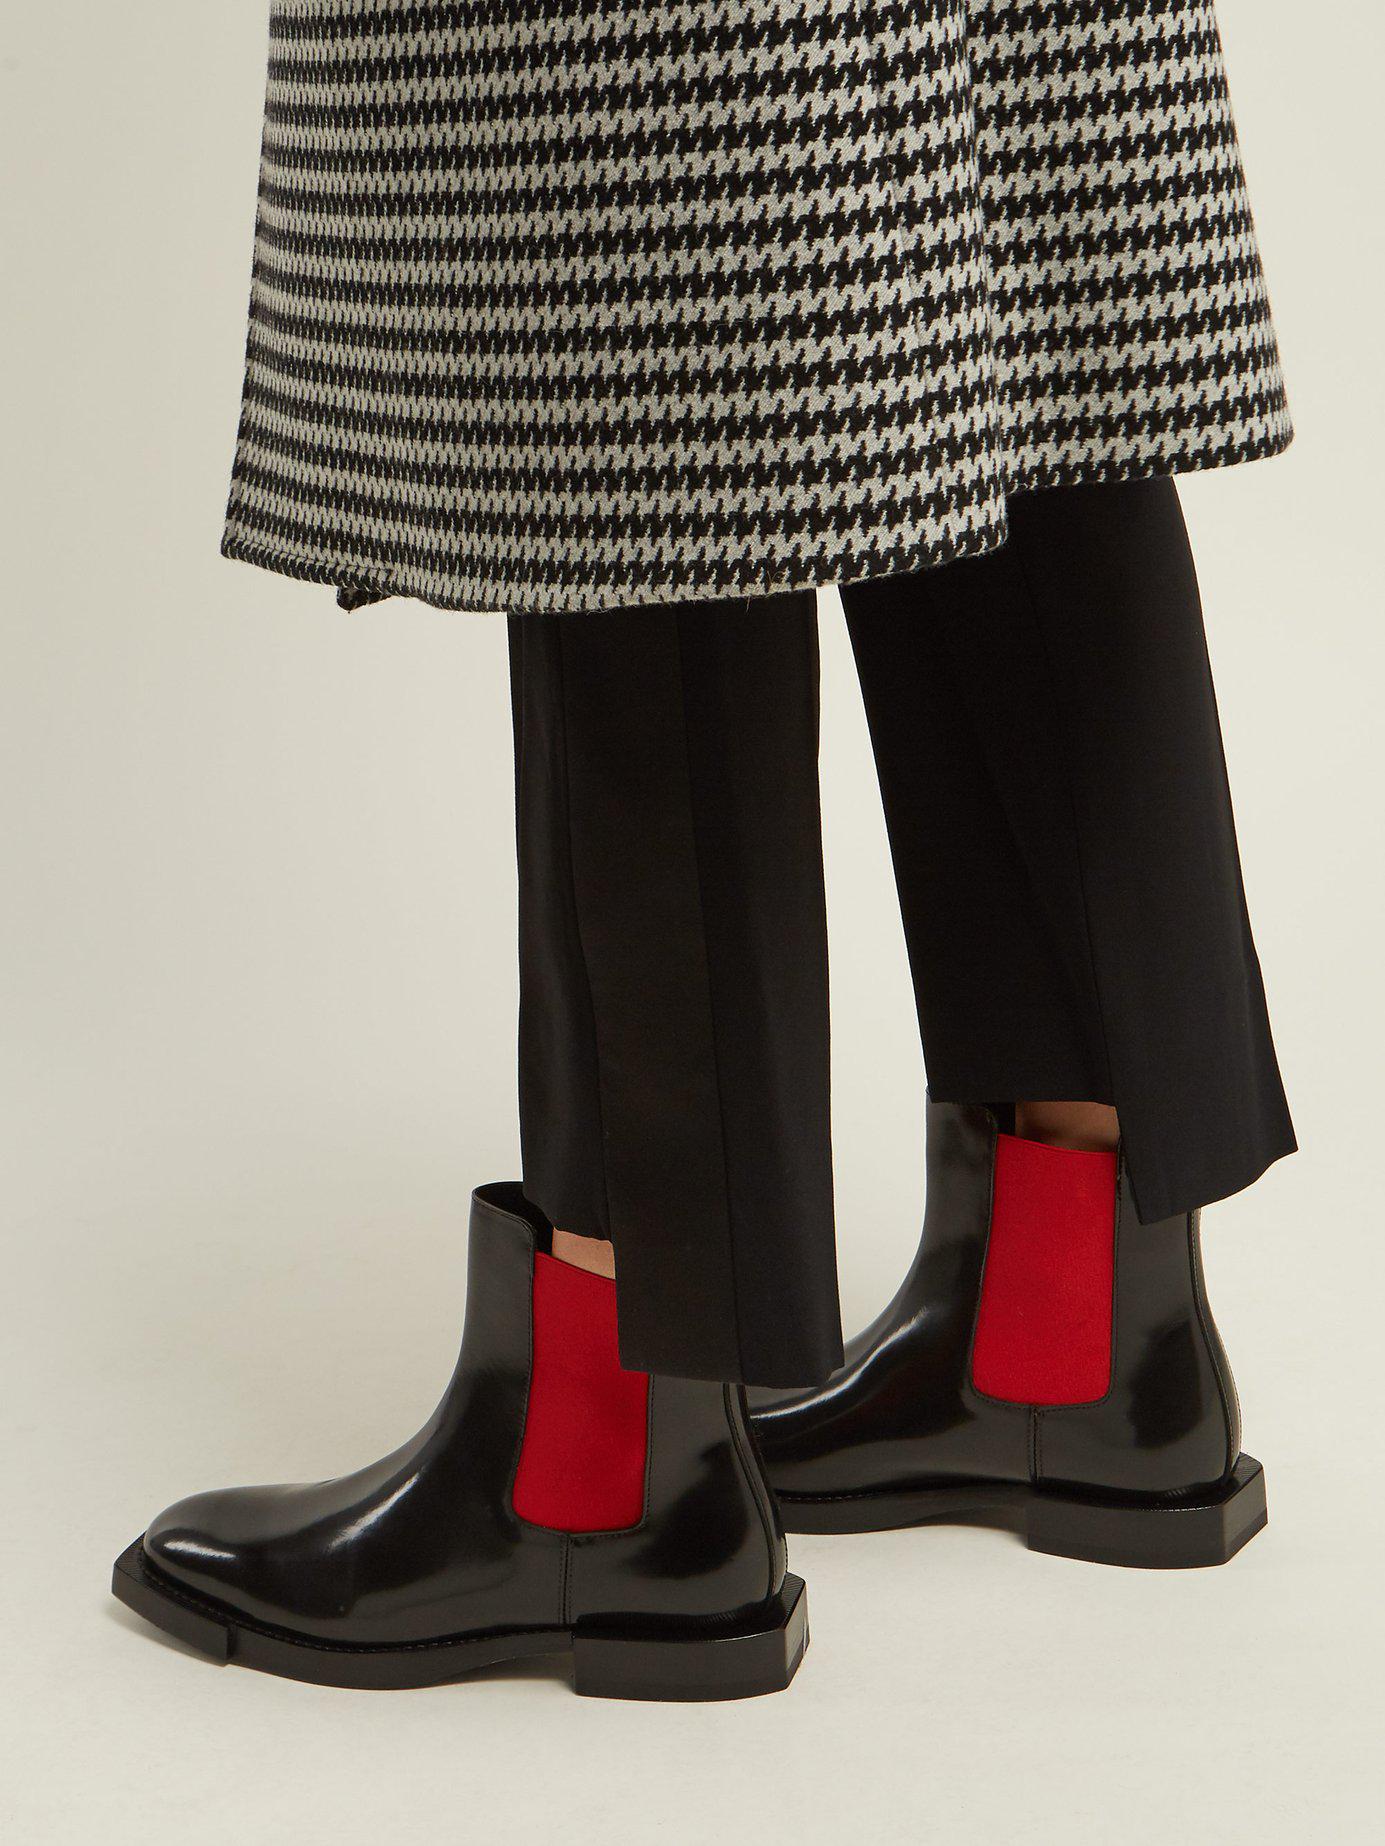 Alexander McQueen Hybrid Patent-leather Chelsea Boots in Black/Red 